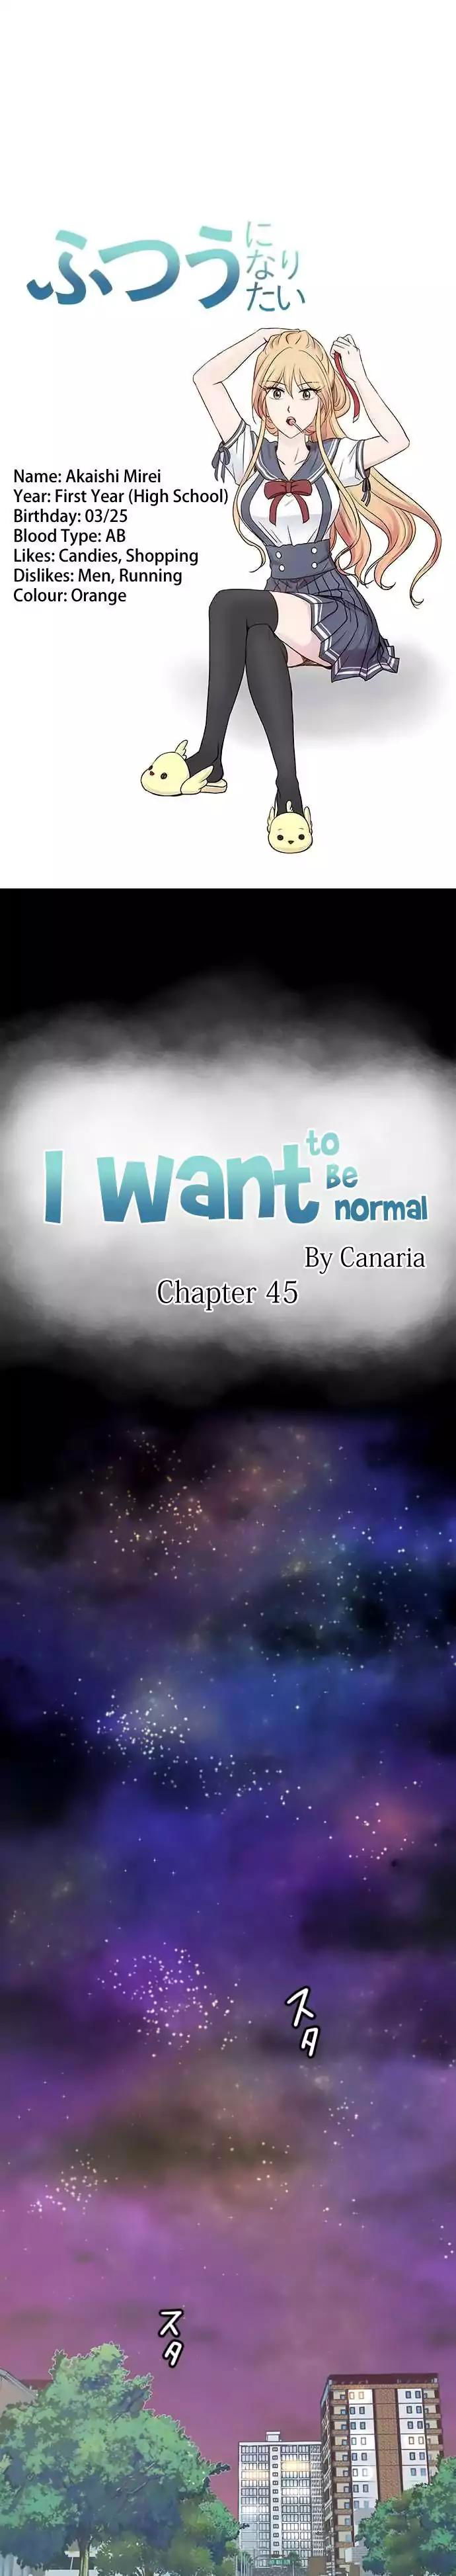 I want to be normal Chapter 45 page 1